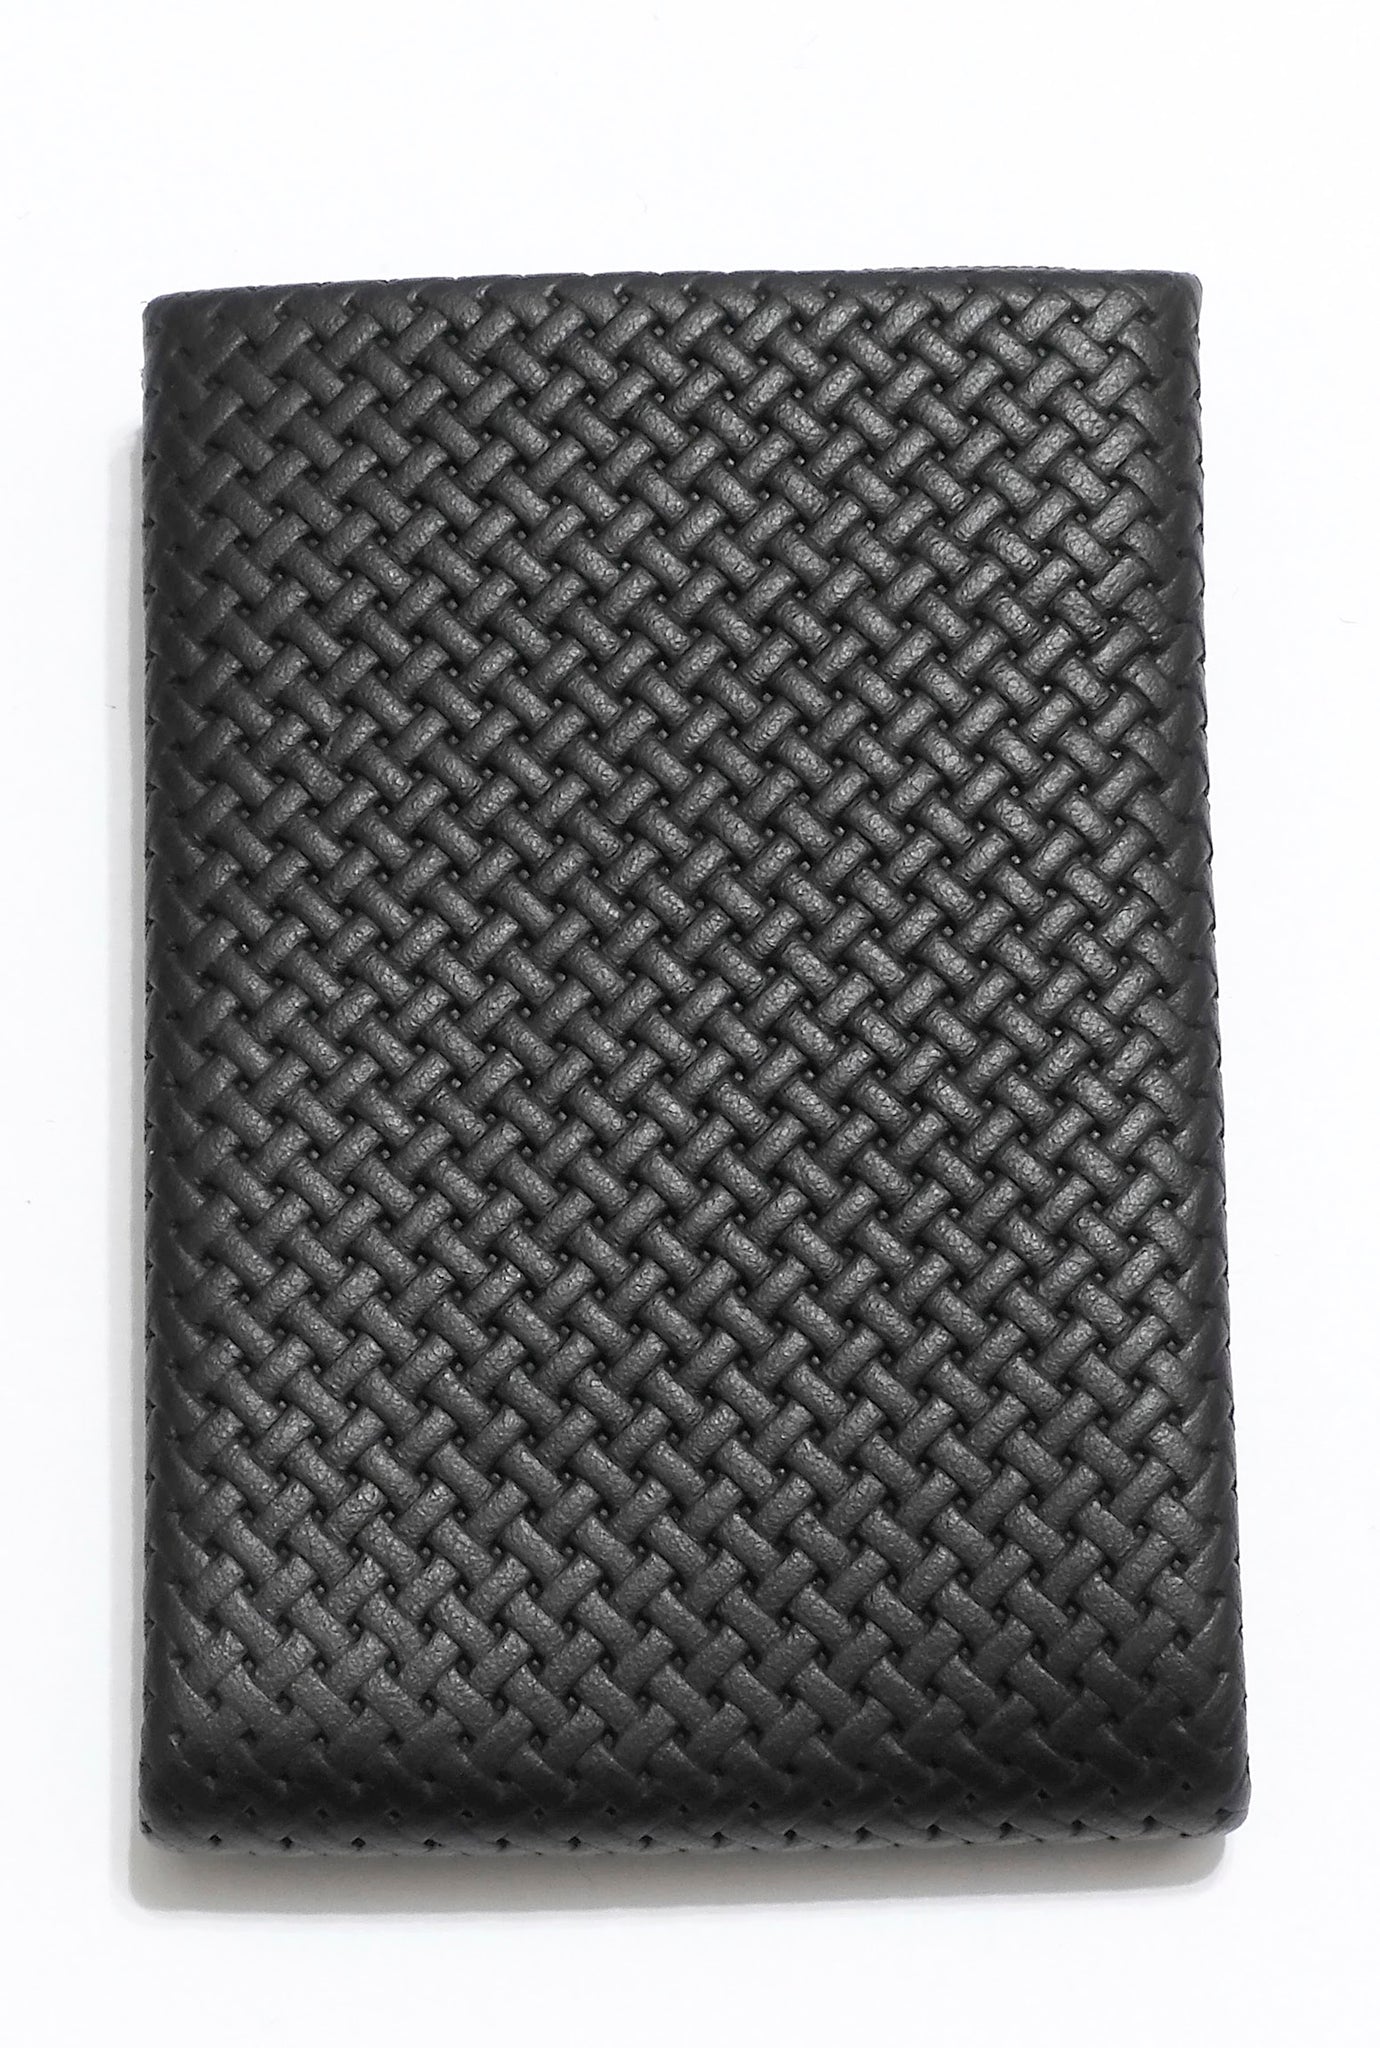 Nero Wallet 02 Design Series - Experience the Perfect Balance of Form and Function with Our Leather Minimalist Wallets - RFID blocking 4 +1 - minimalist mens wallet